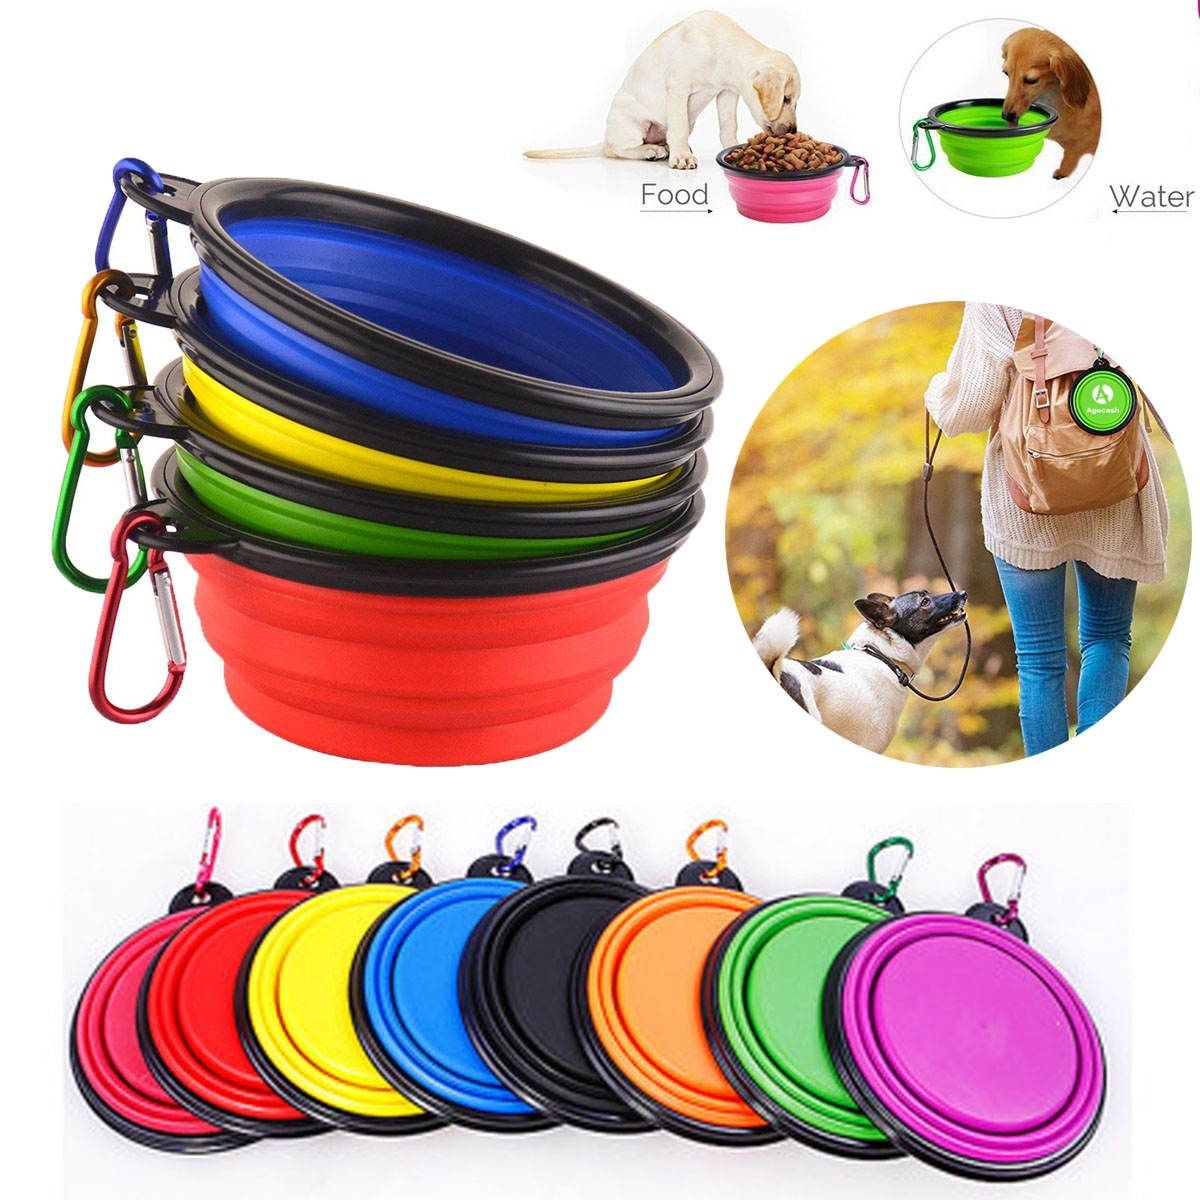 GL-AKL0054 Portable Folding Pets Bowl with Carabiner